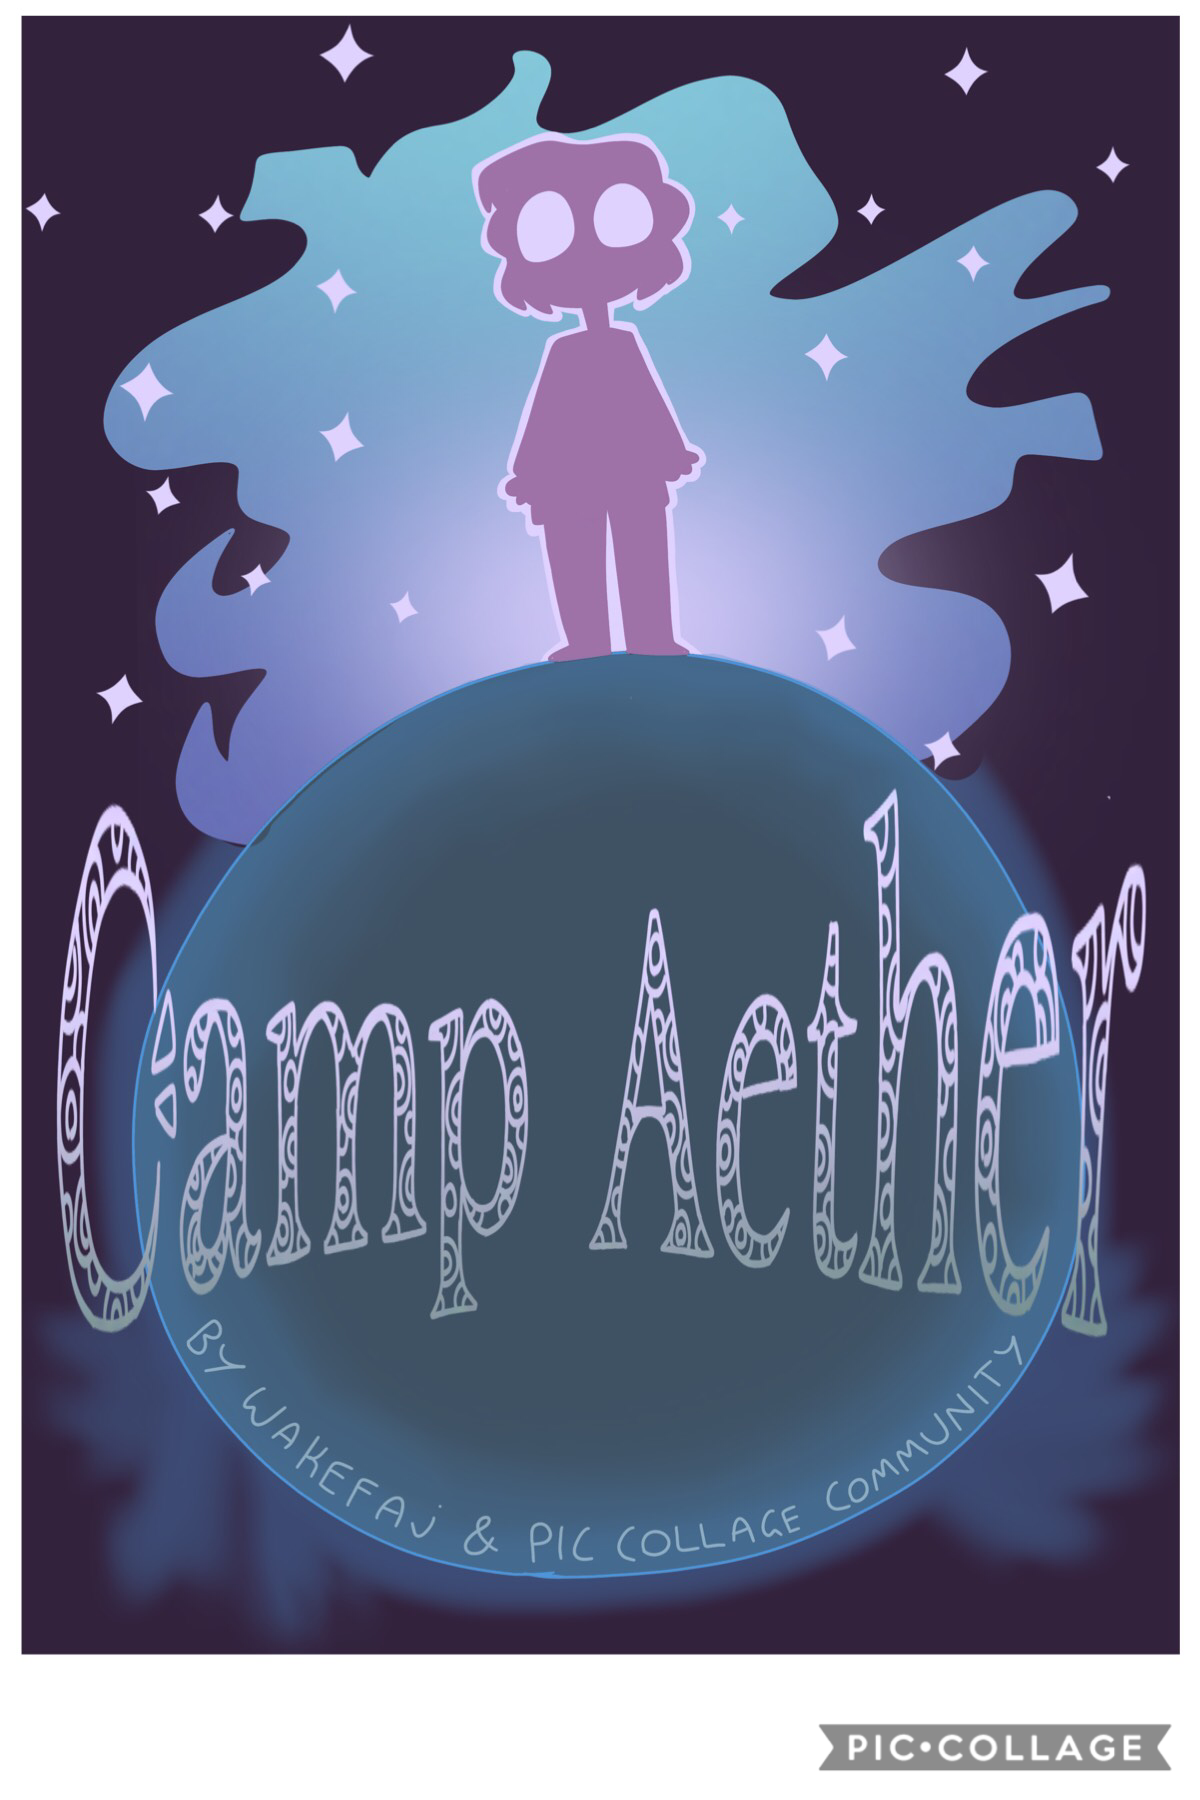 xX_Tap The Text Please!_Xx
Camp Aether Cover Art! Whoo! This series is finally a thing! I had the idea for this at the beginning of the year (2018) but now is the first offical awakening of it! I’ve been WAY too excited about this for the last week straig